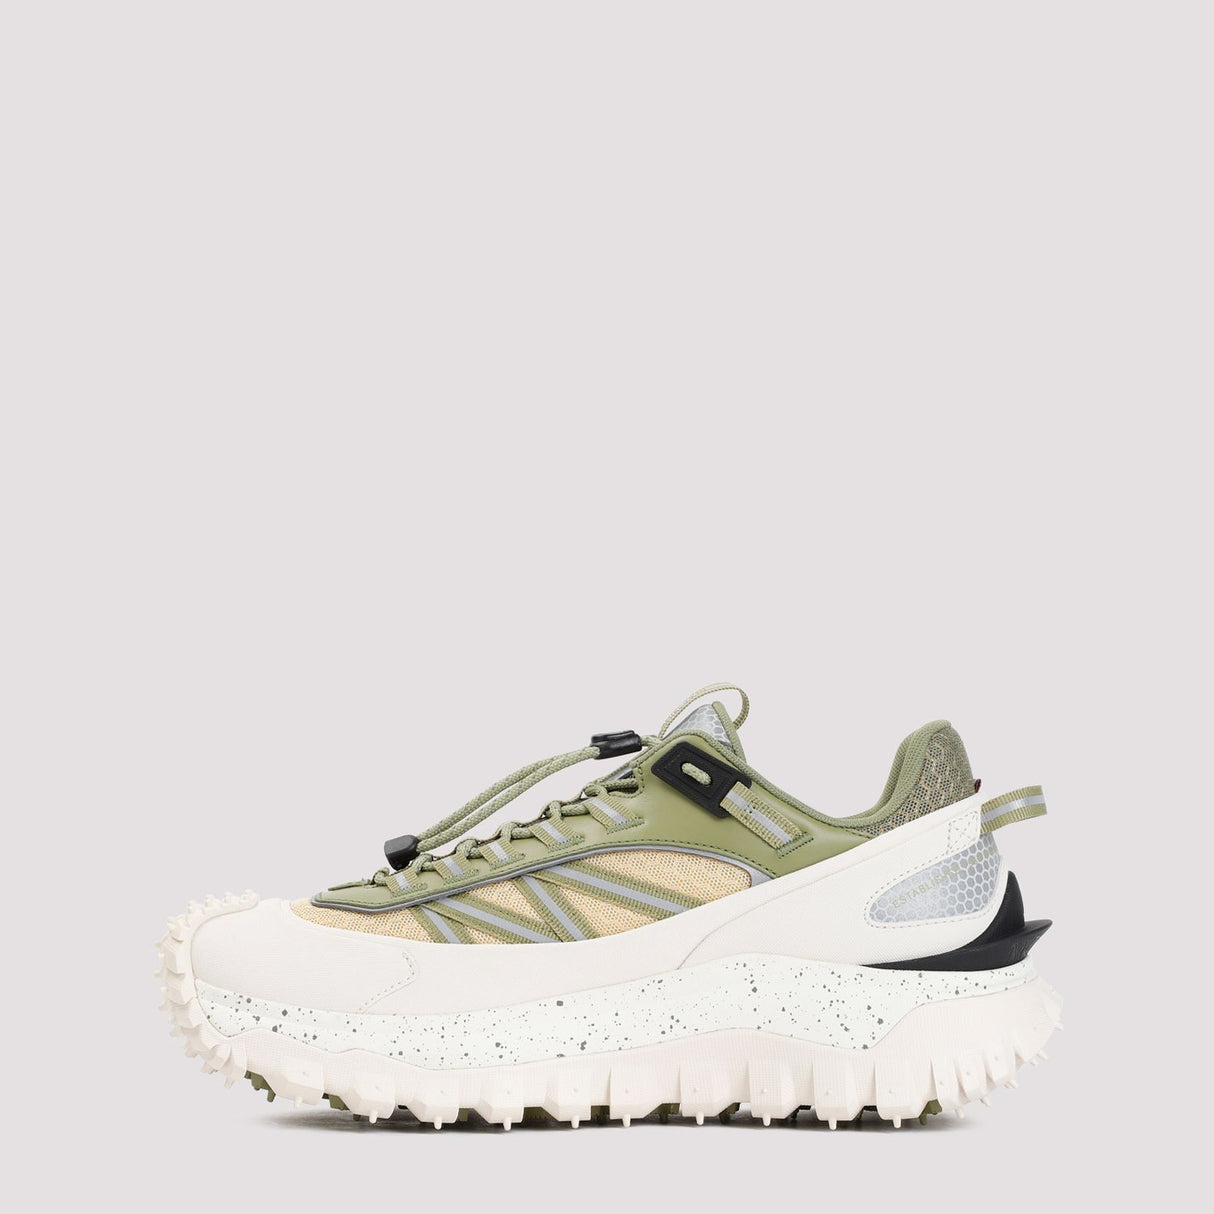 MONCLER Multicolor Men's Trail Running Sneakers